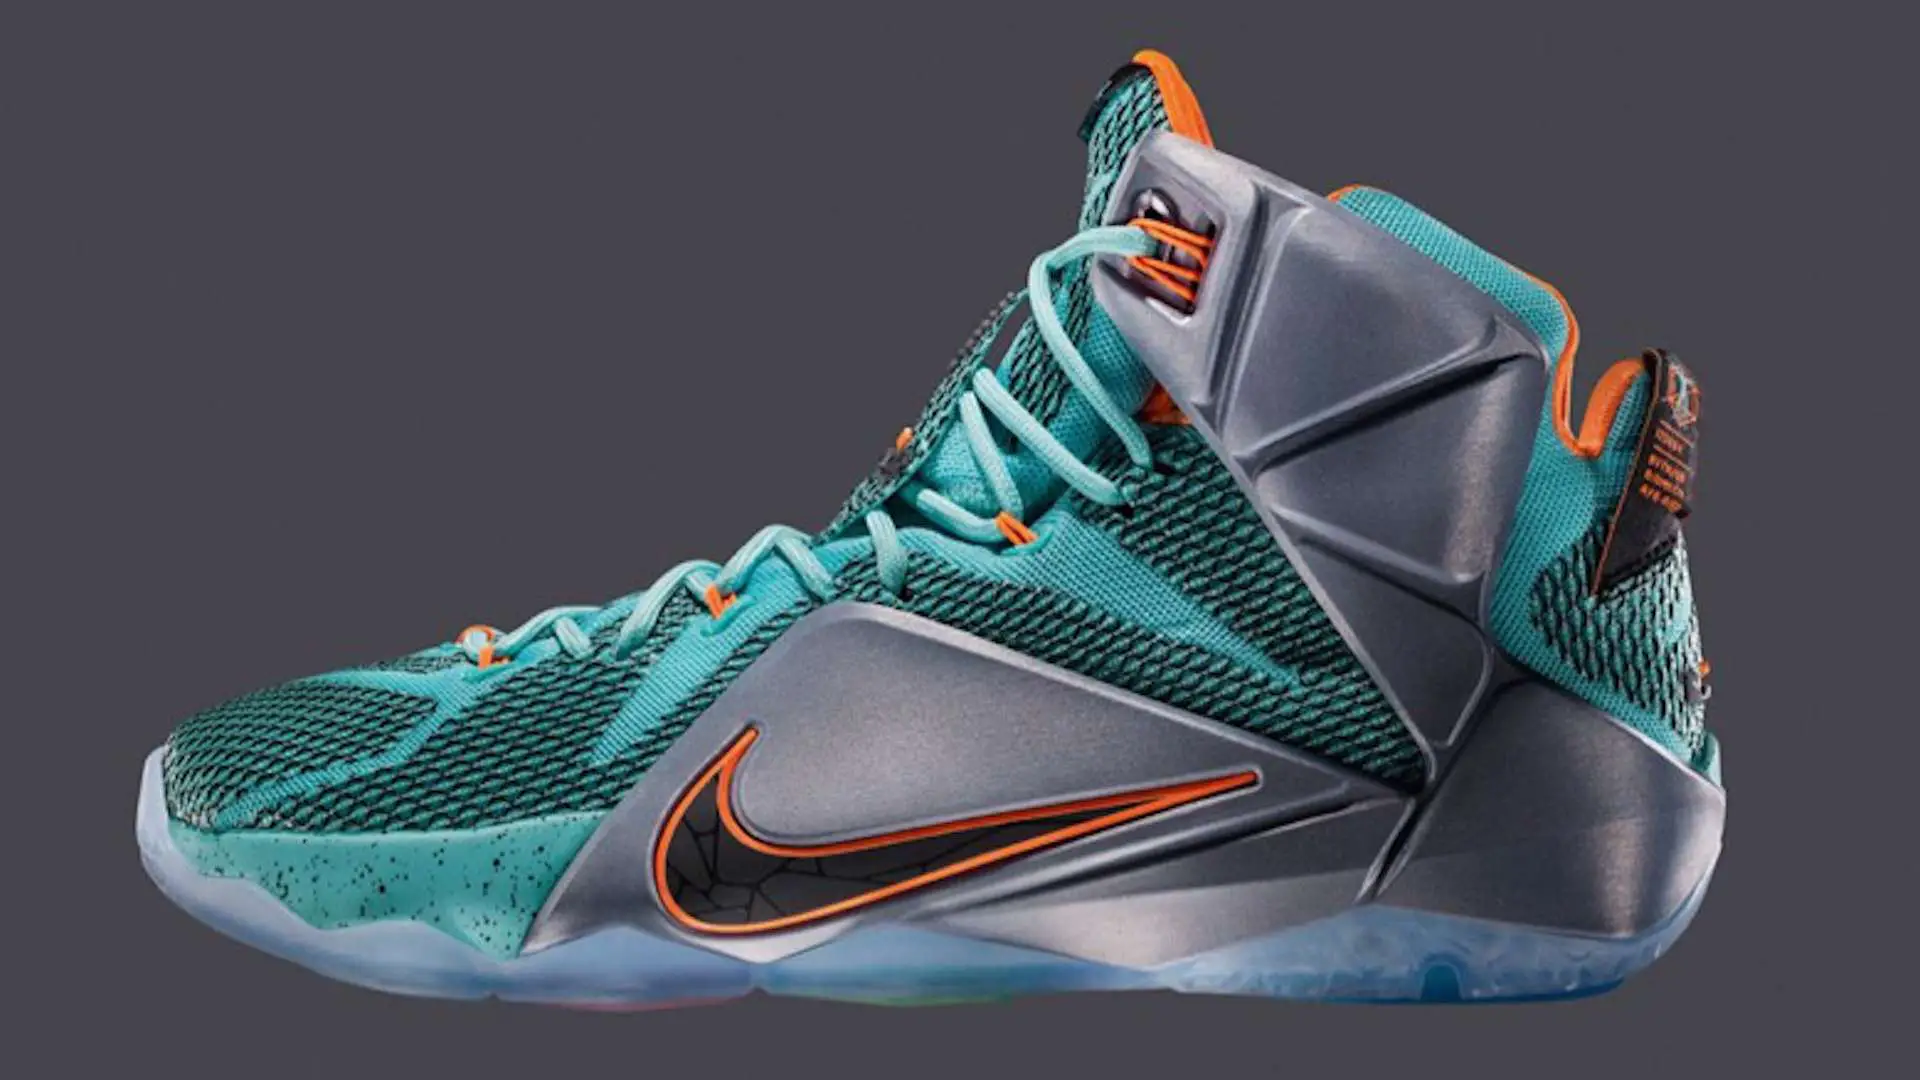 Nike releases newest LeBron James signature shoe in LeBron 12 ...